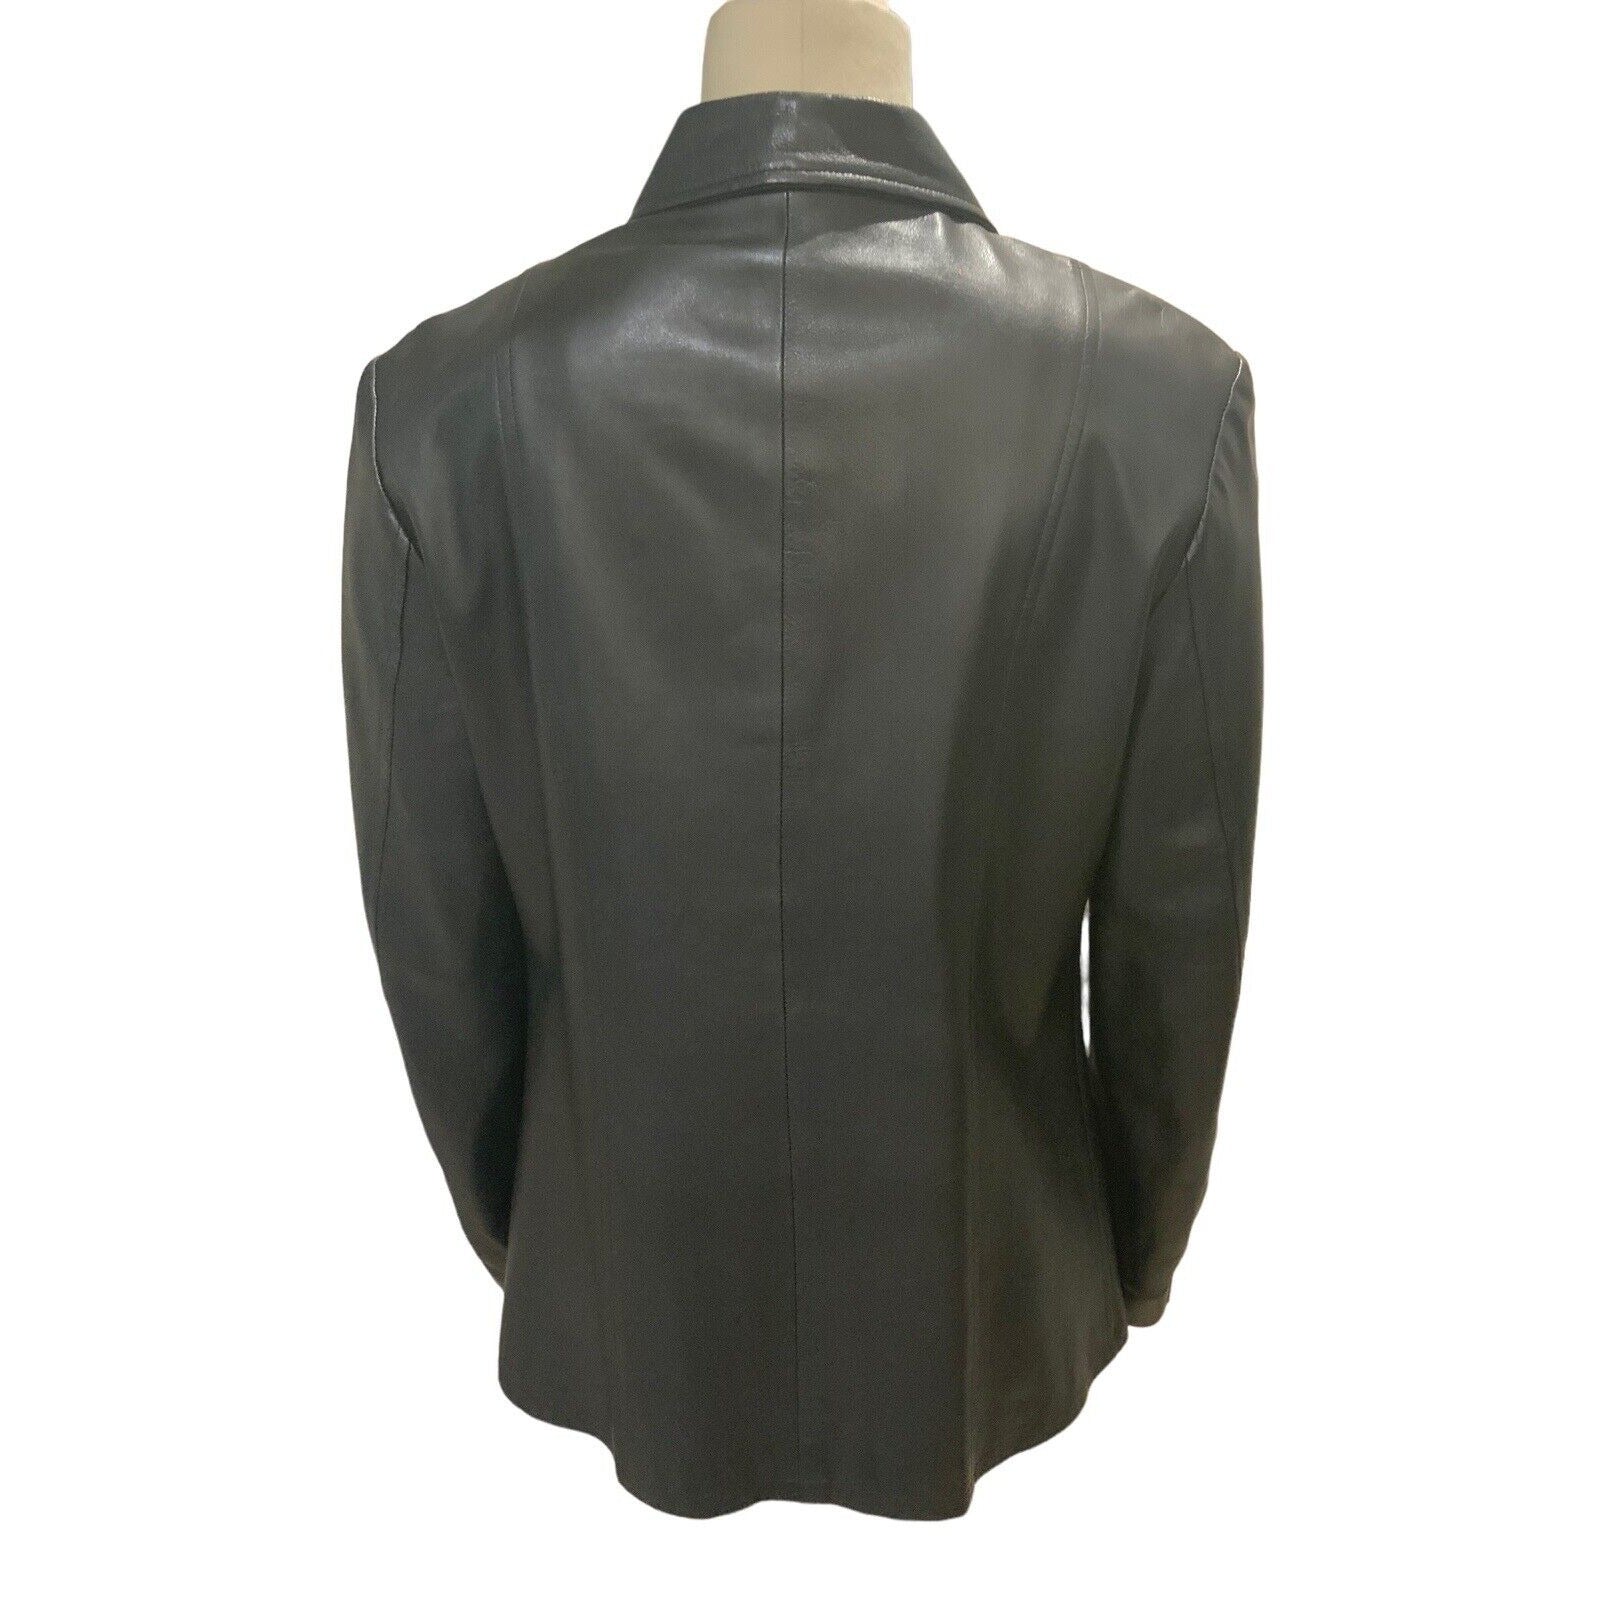 Back View Of Women's Leather Jacket